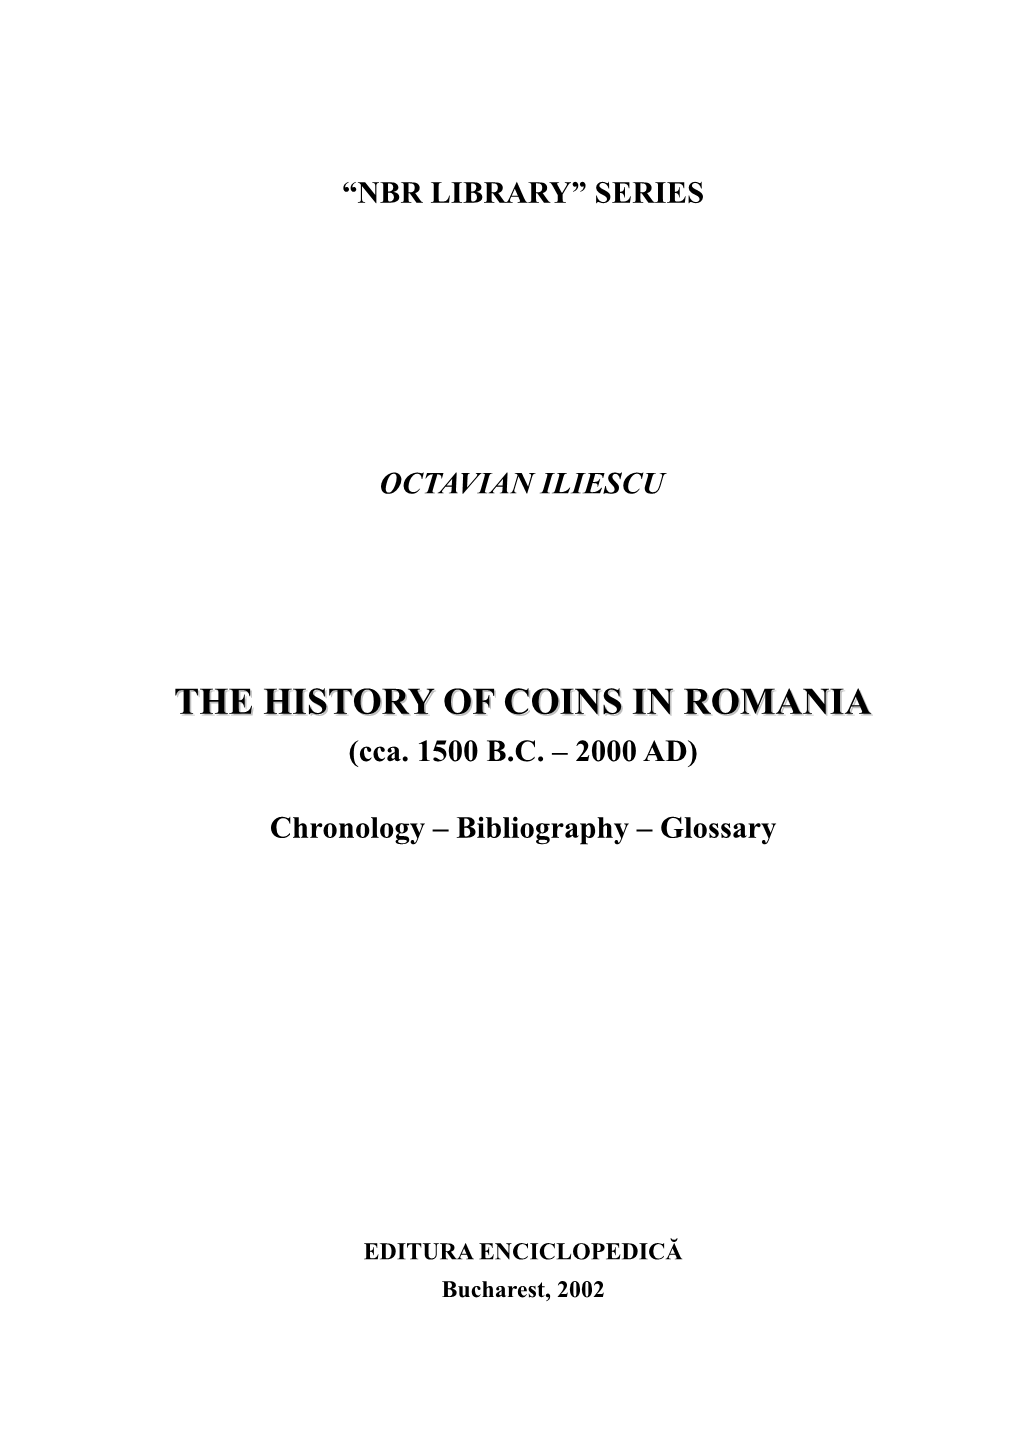 The History of Coins in Romania